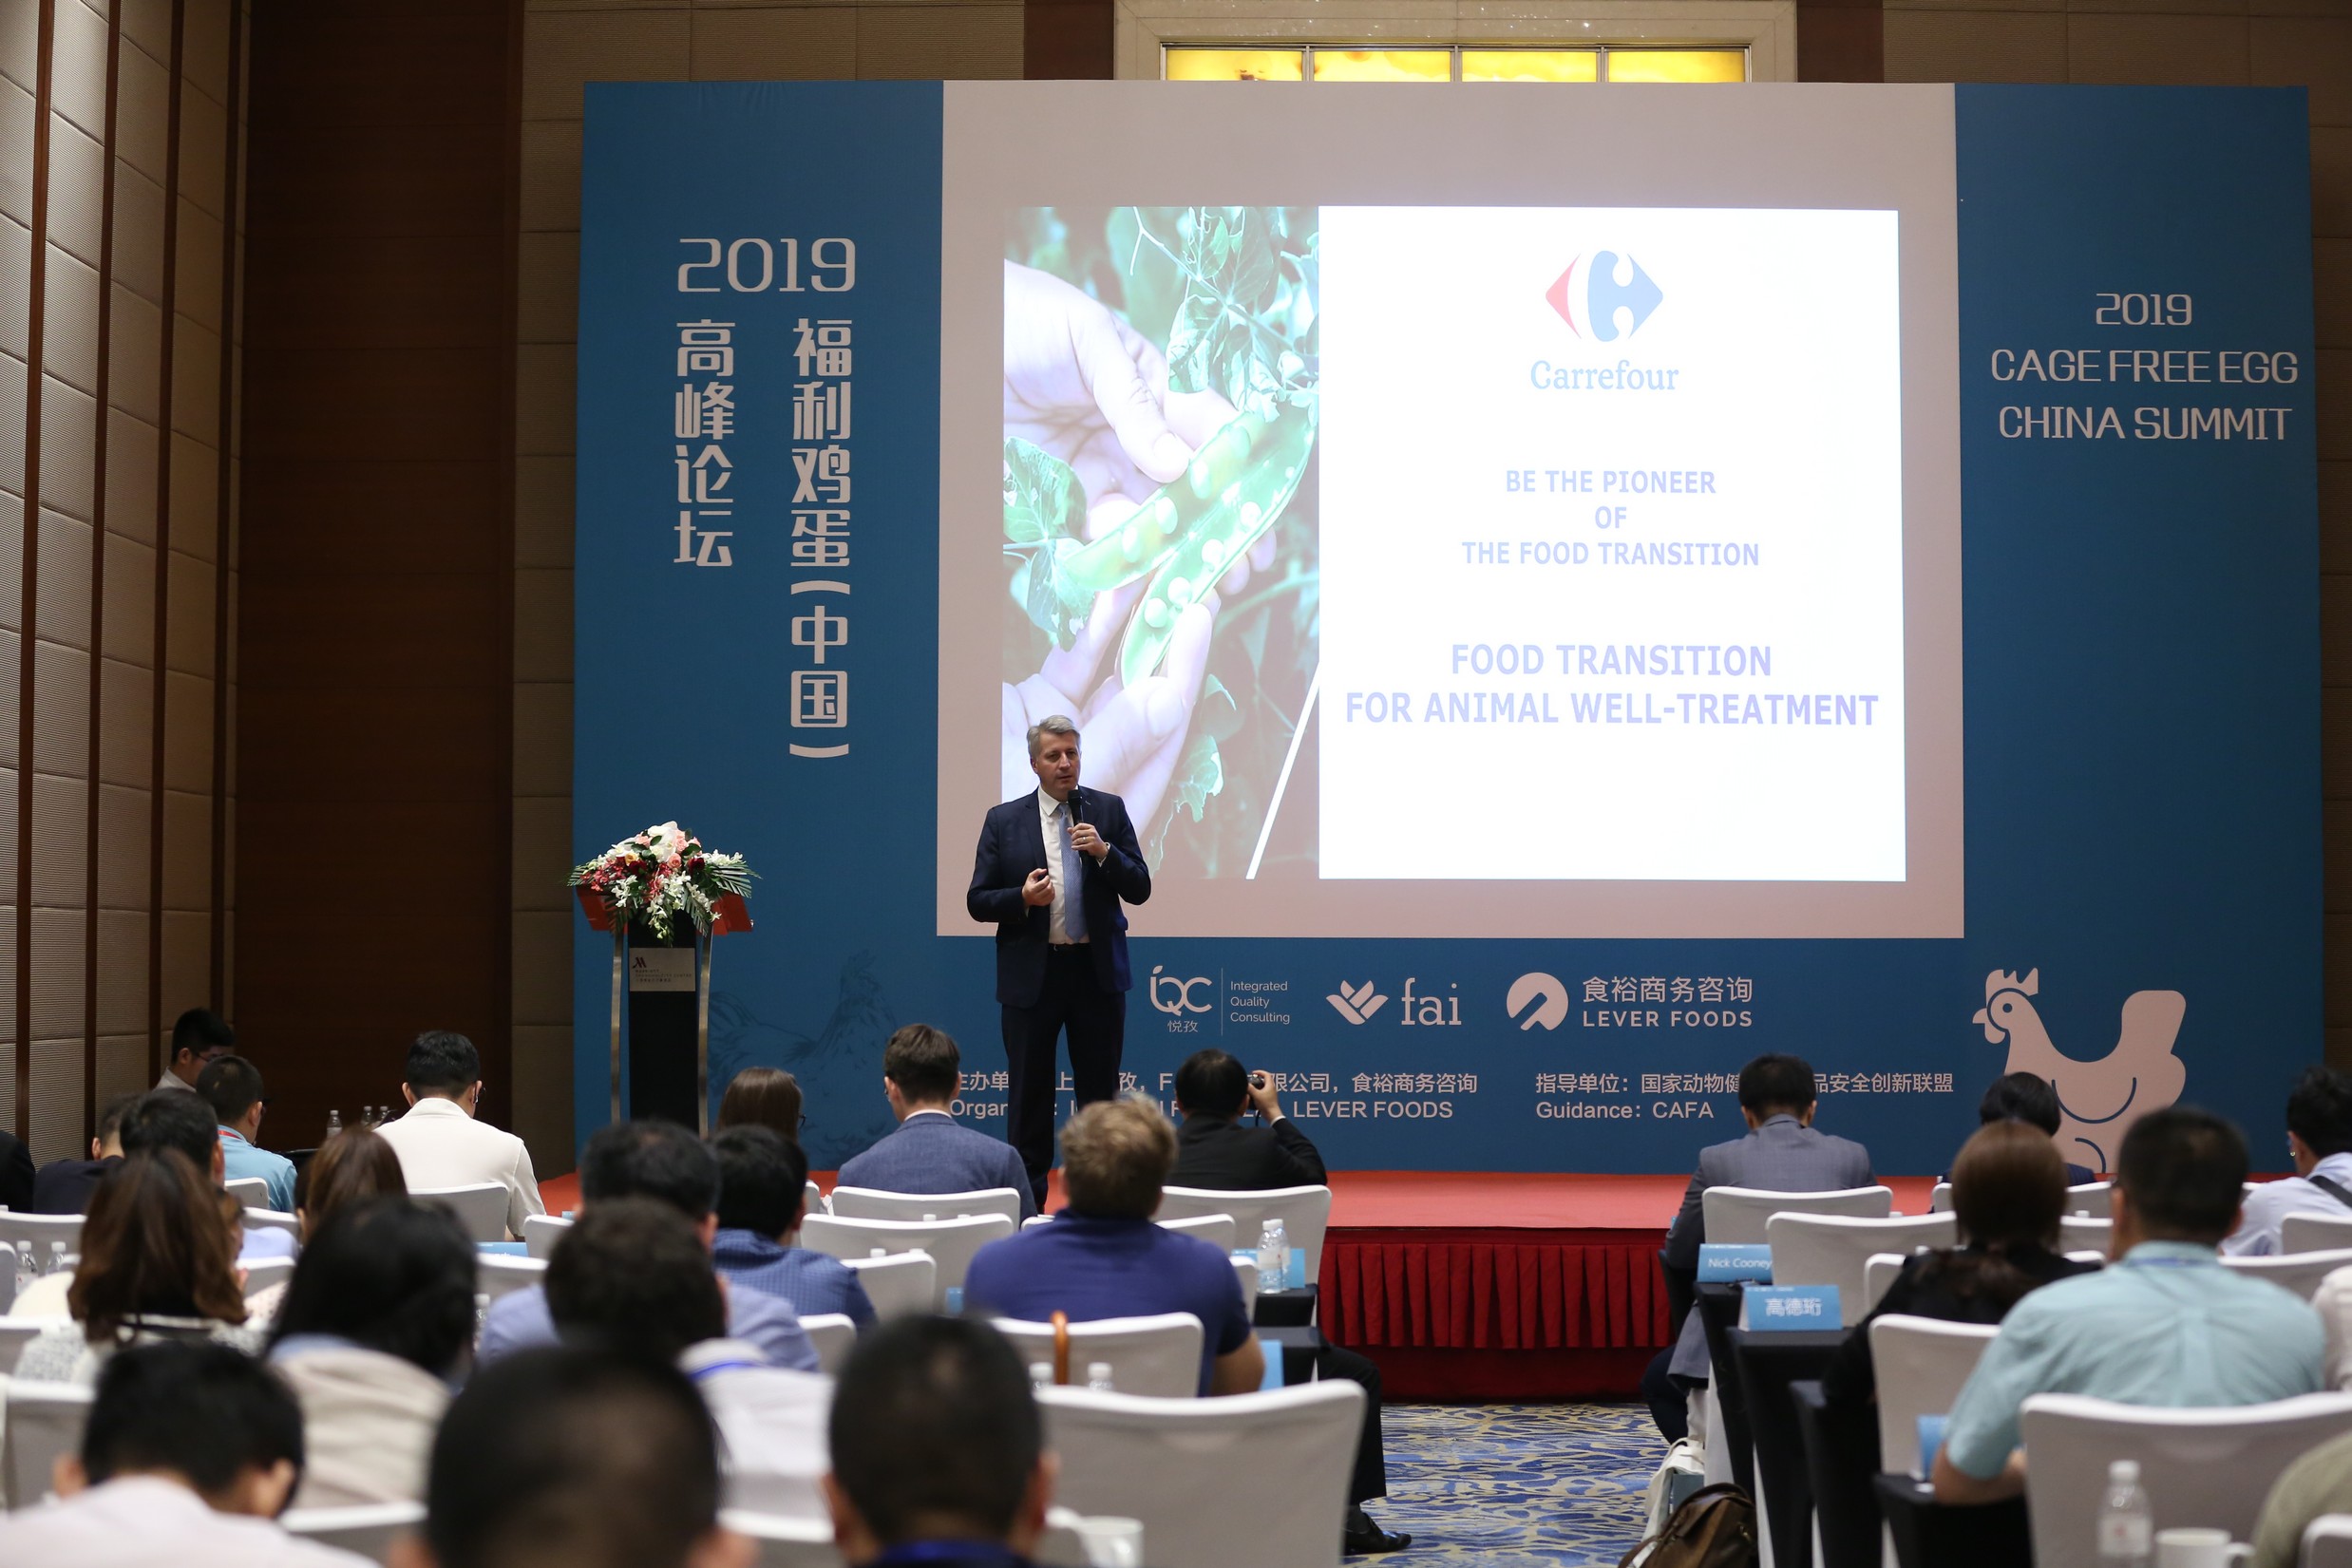 Hervé Martin, national food safety and quality director, Carrefour China